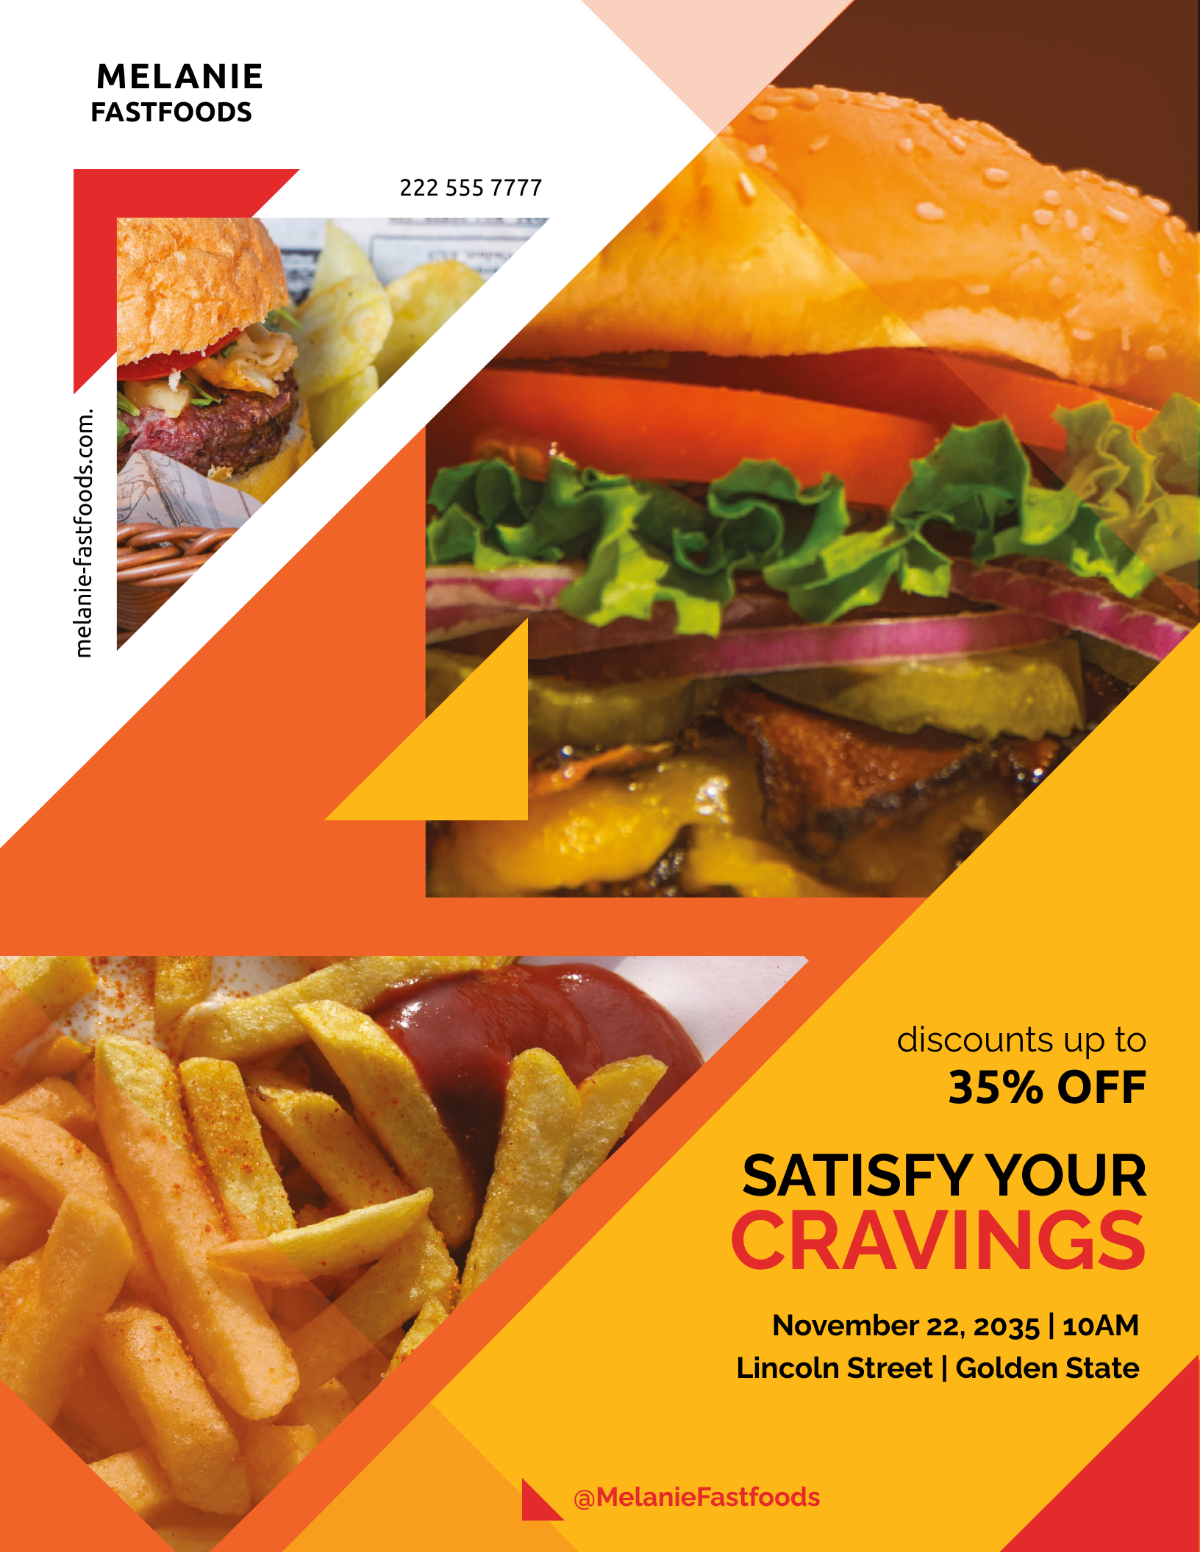 Delicious Fast Food Flyer Template